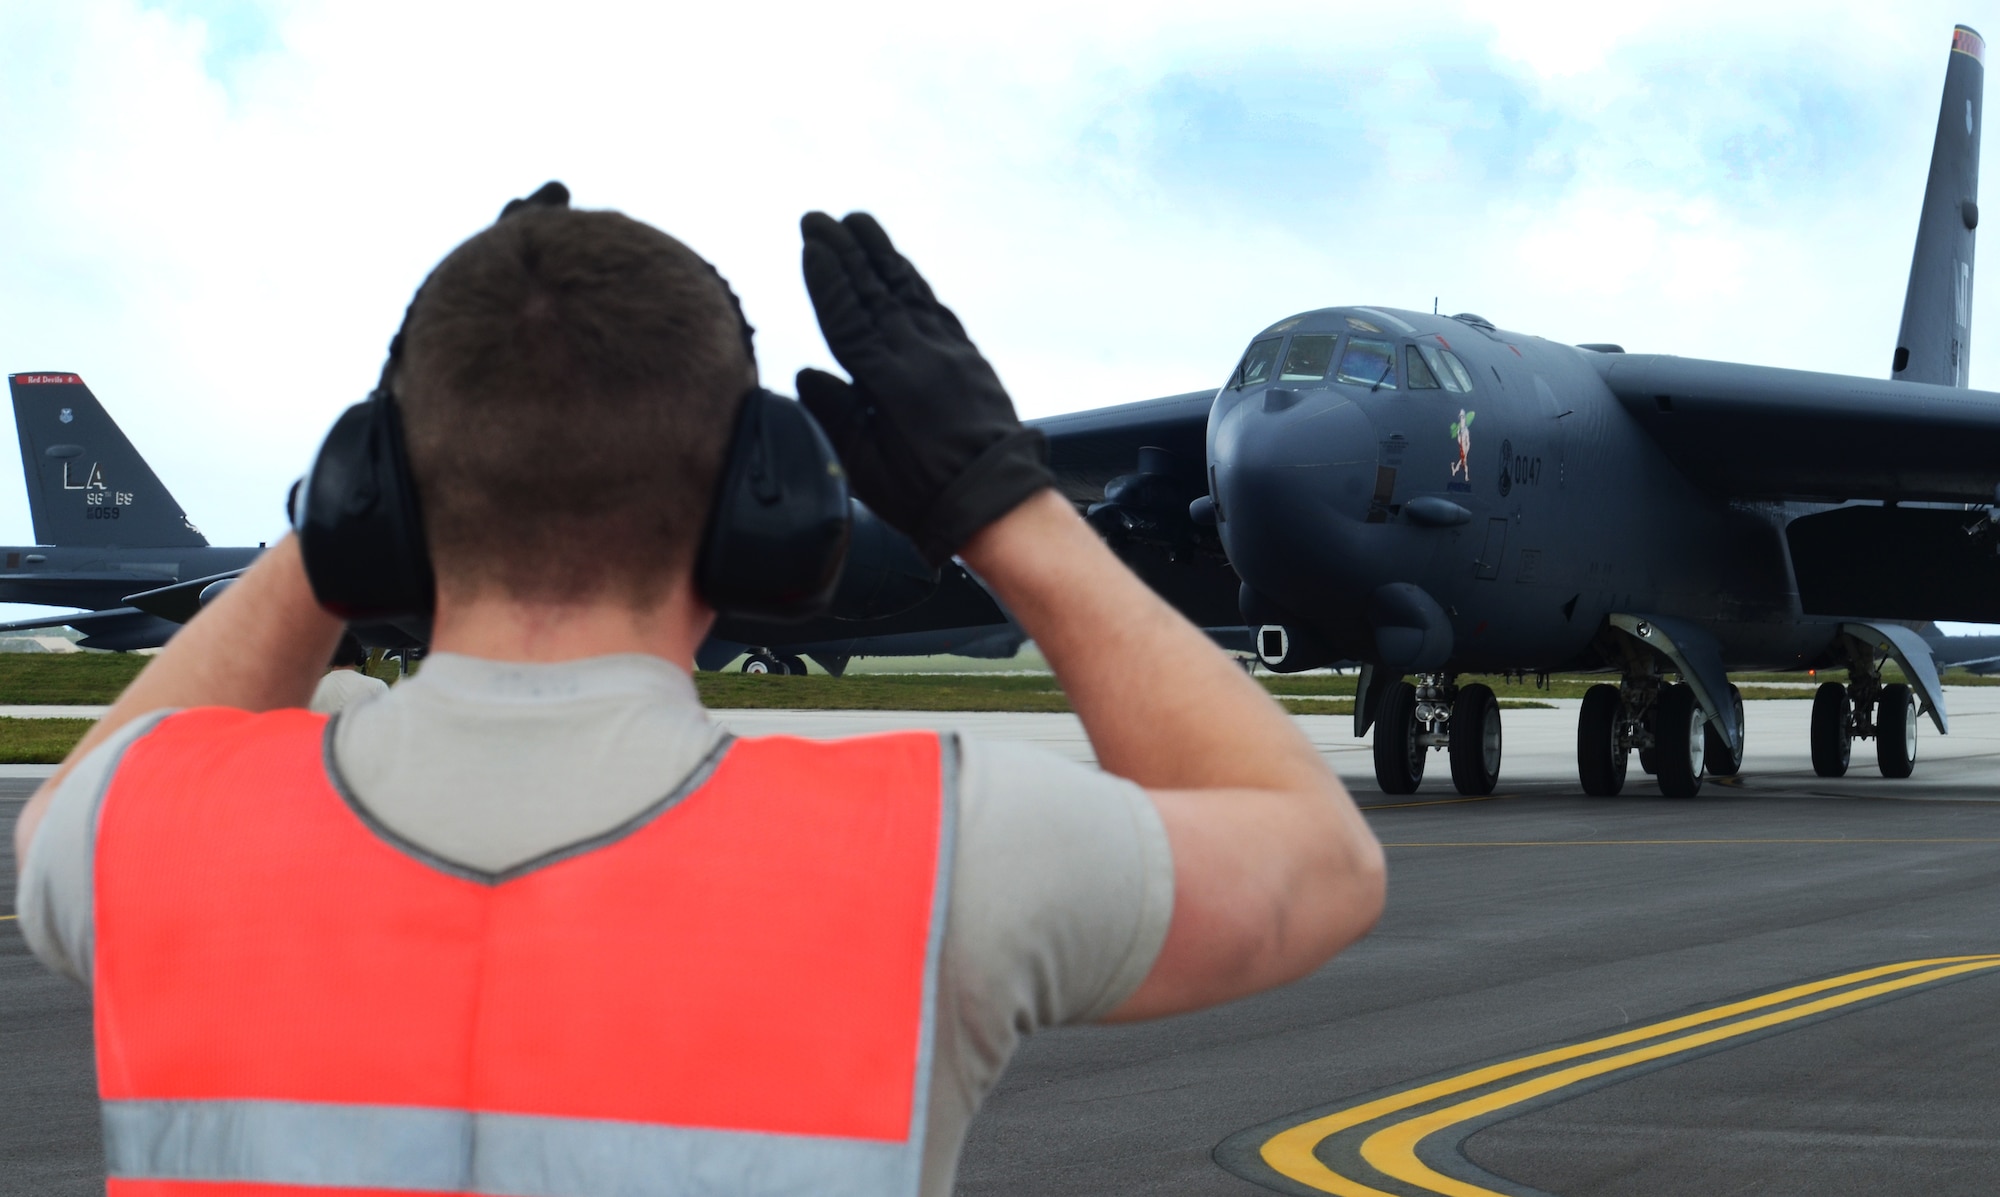 Airman 1st Class Kevin Carmel, 36th Expeditionary Aircraft Maintenance Squadron crew chief, deployed from Minot Air Force Base, N.D., guides a B-52 Stratofortress to its parking ramp at Andersen Air Force Base, Guam, April 2, 2013. A new rotation of aircrews, maintenance personnel and aircraft arrived to Guam March 31 to replace the 96th Expeditionary Bomb Squadron in support of U.S. Pacific Command’s continuous bomber presence mission.  (U.S. Air Force photo by Senior Airman Benjamin Wiseman/Released)